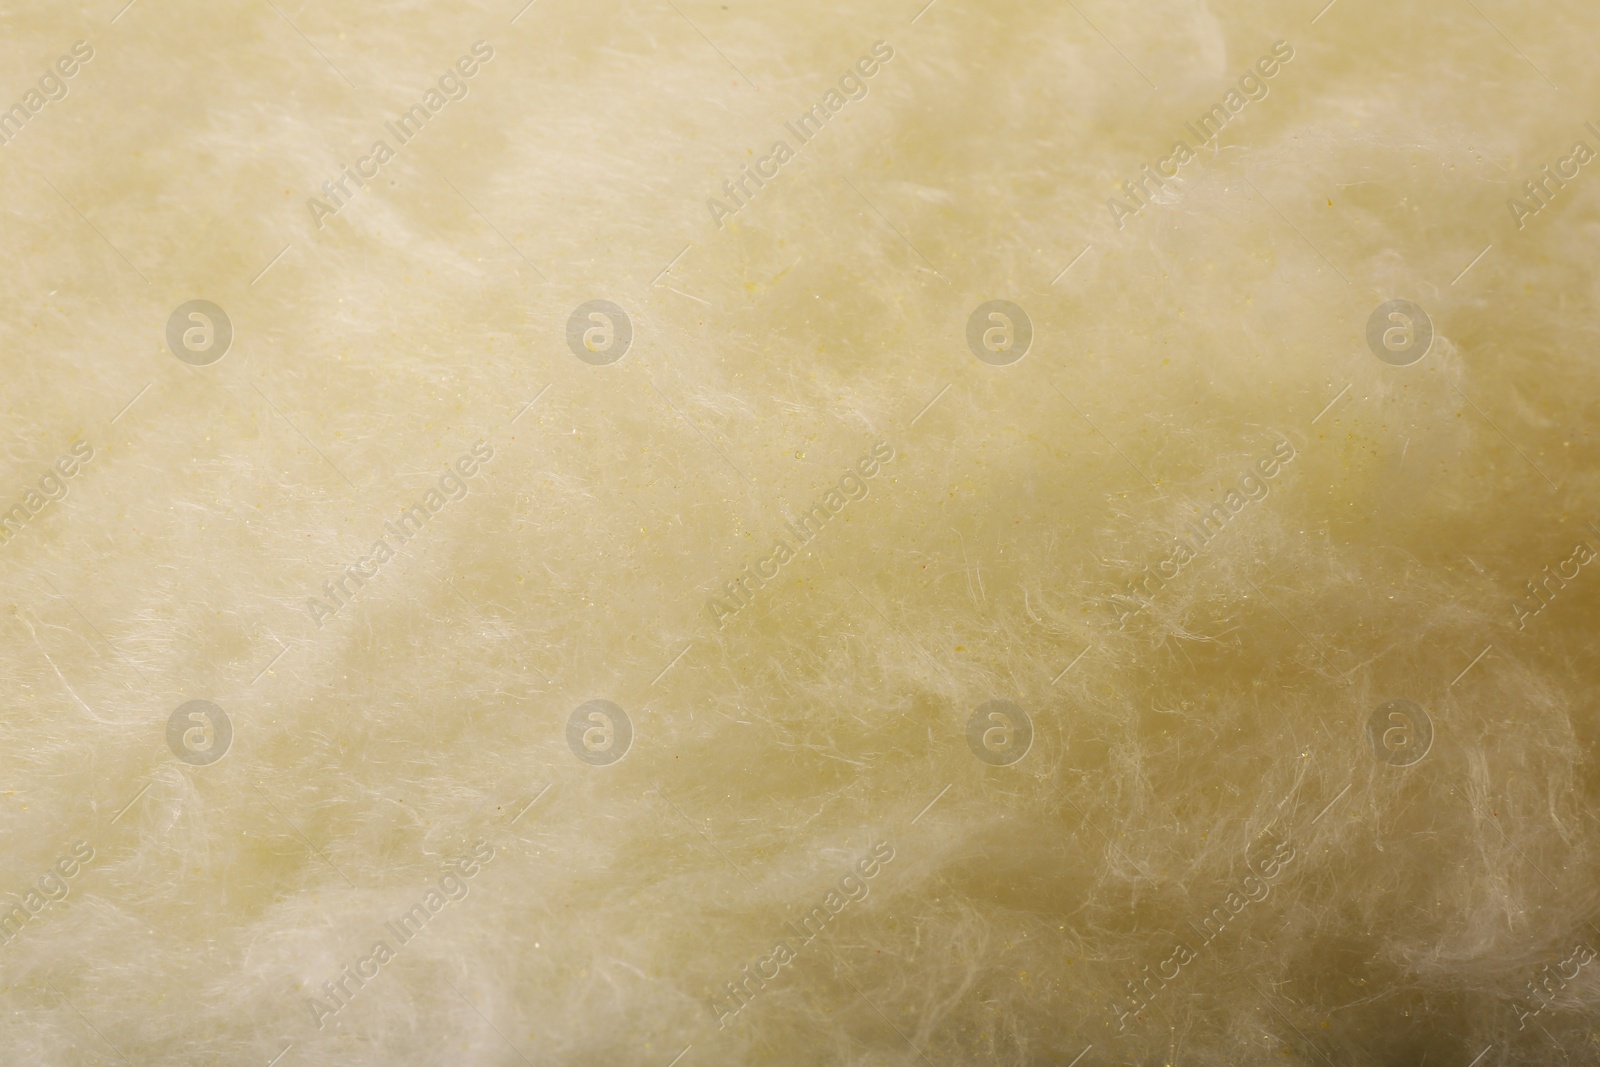 Photo of Sweet cotton candy as background, closeup view